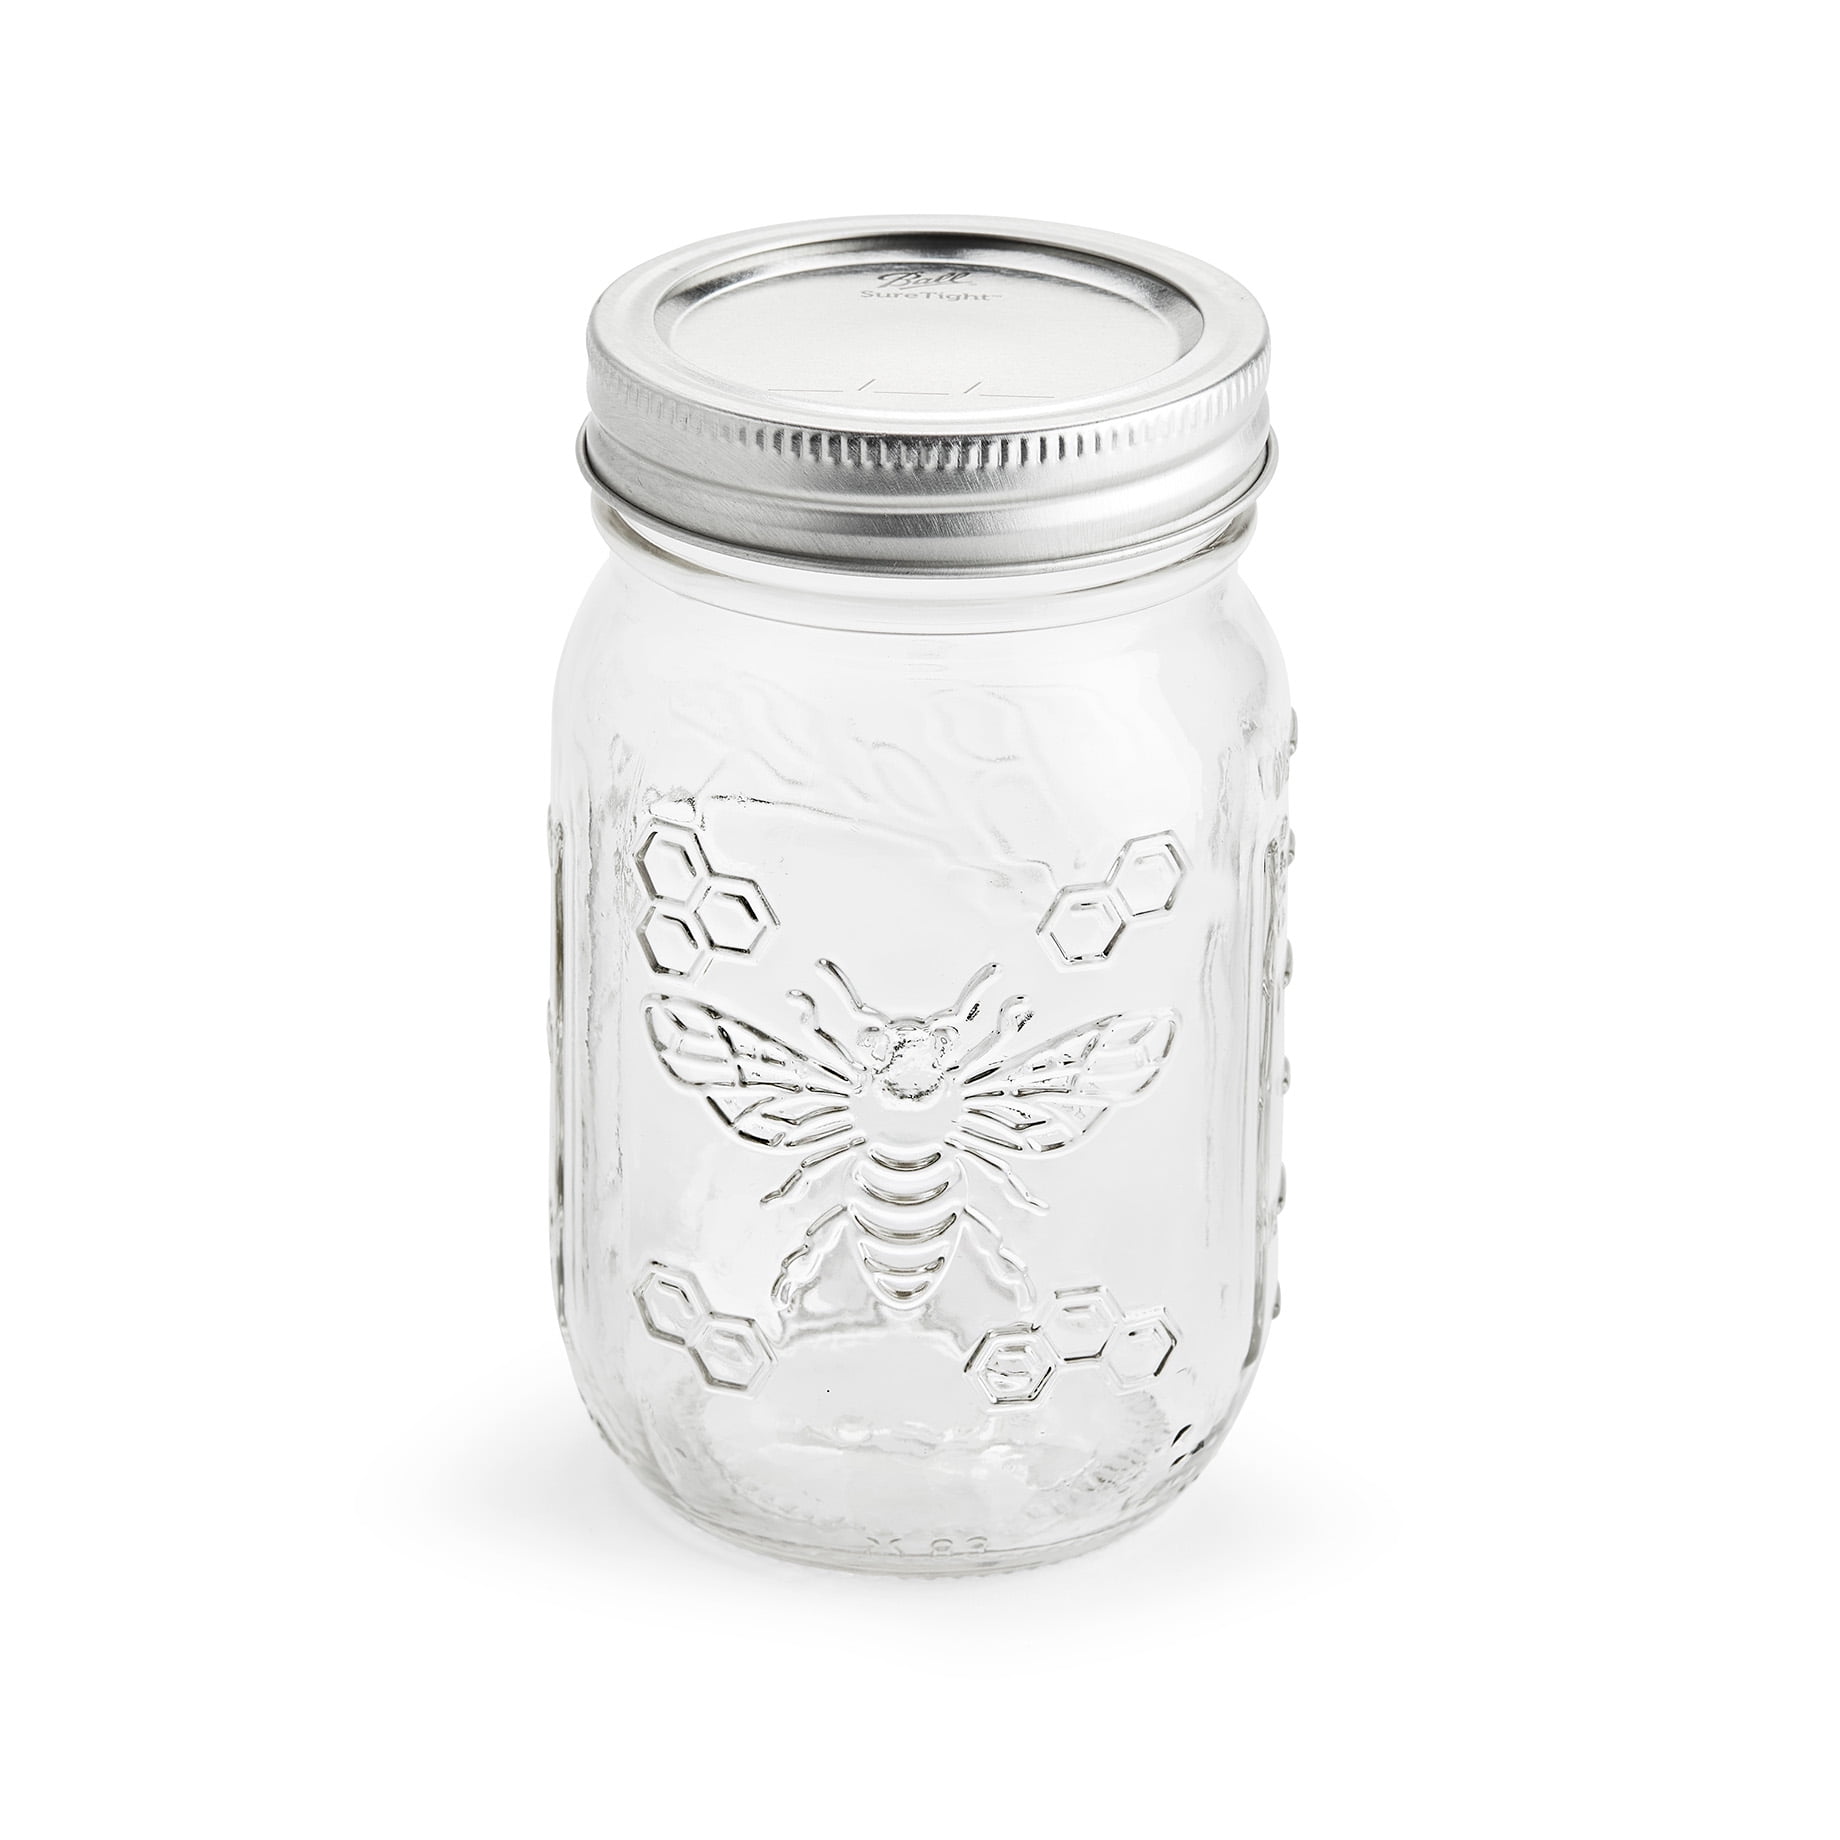 Glass 5 lb Round Jars without Lids - 6 Pack